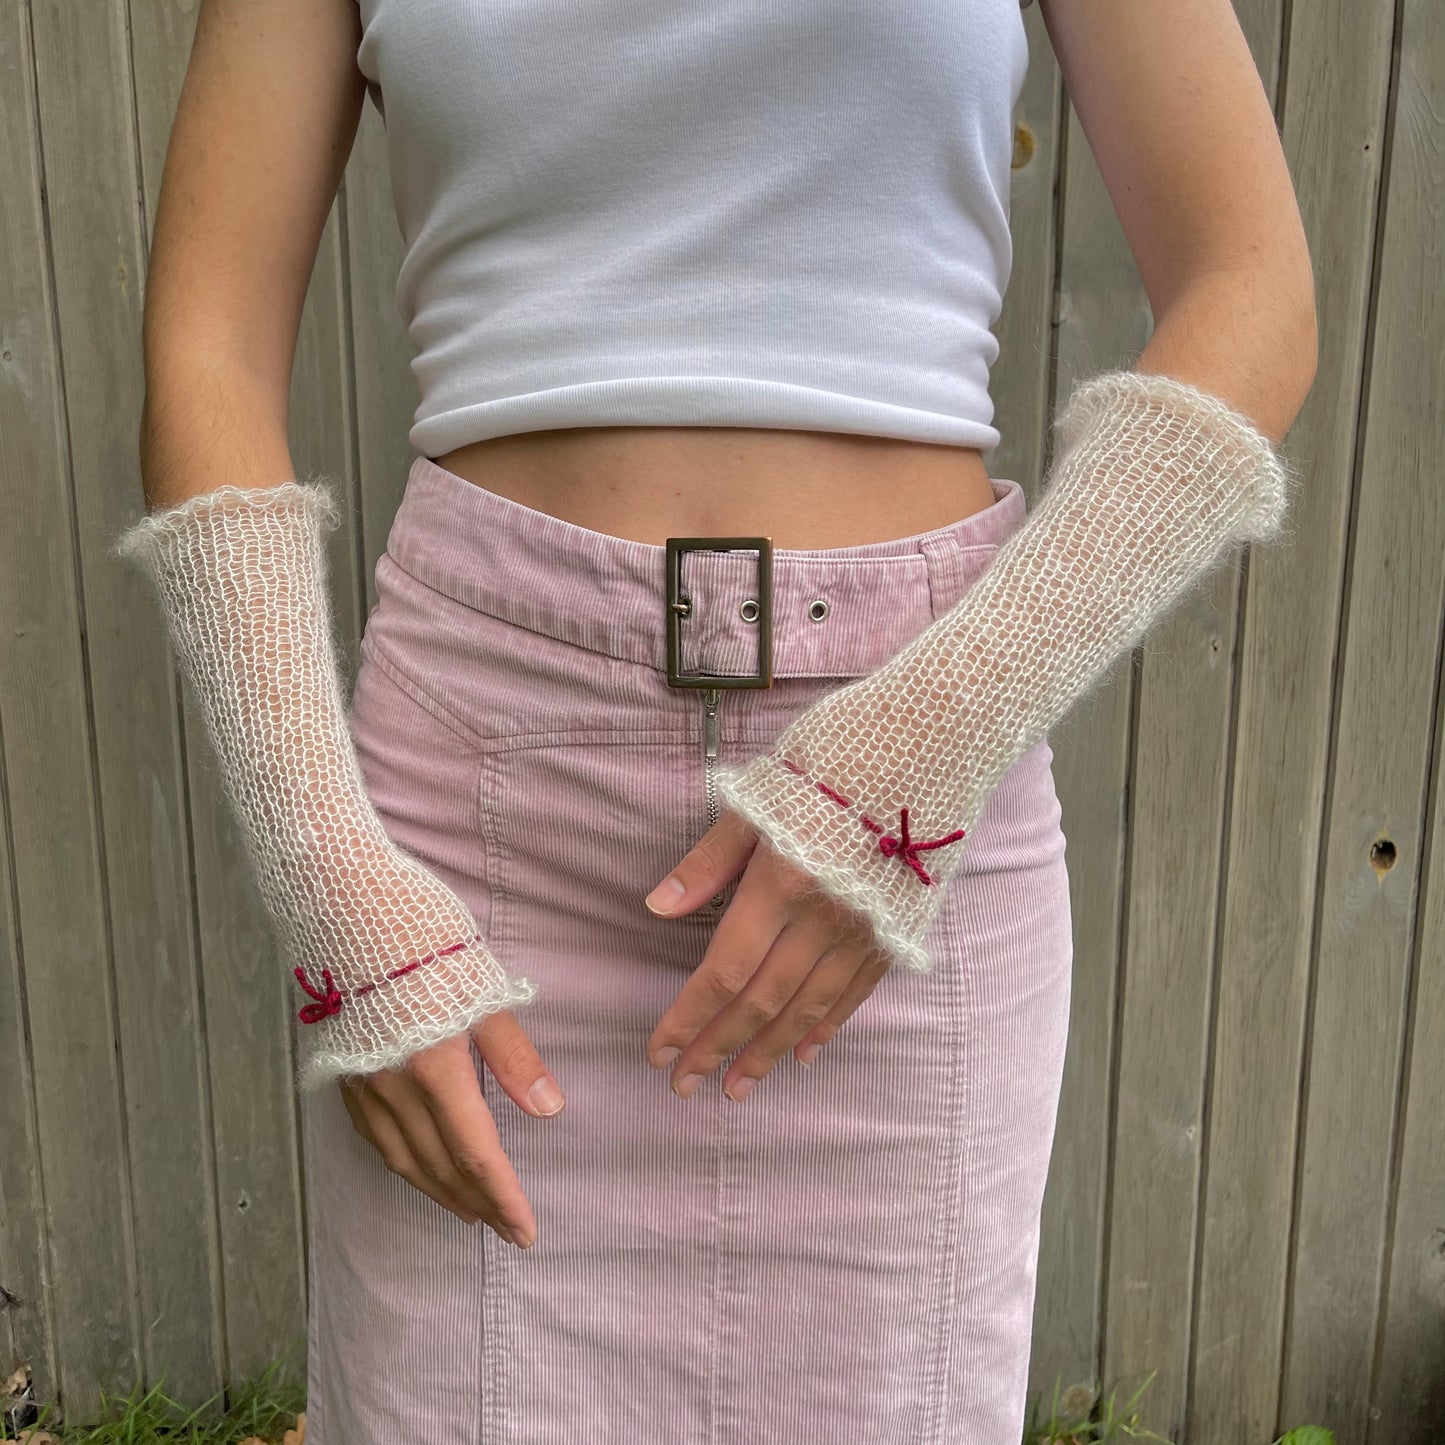 Handmade knitted mohair hand warmers in cream with dark red bow